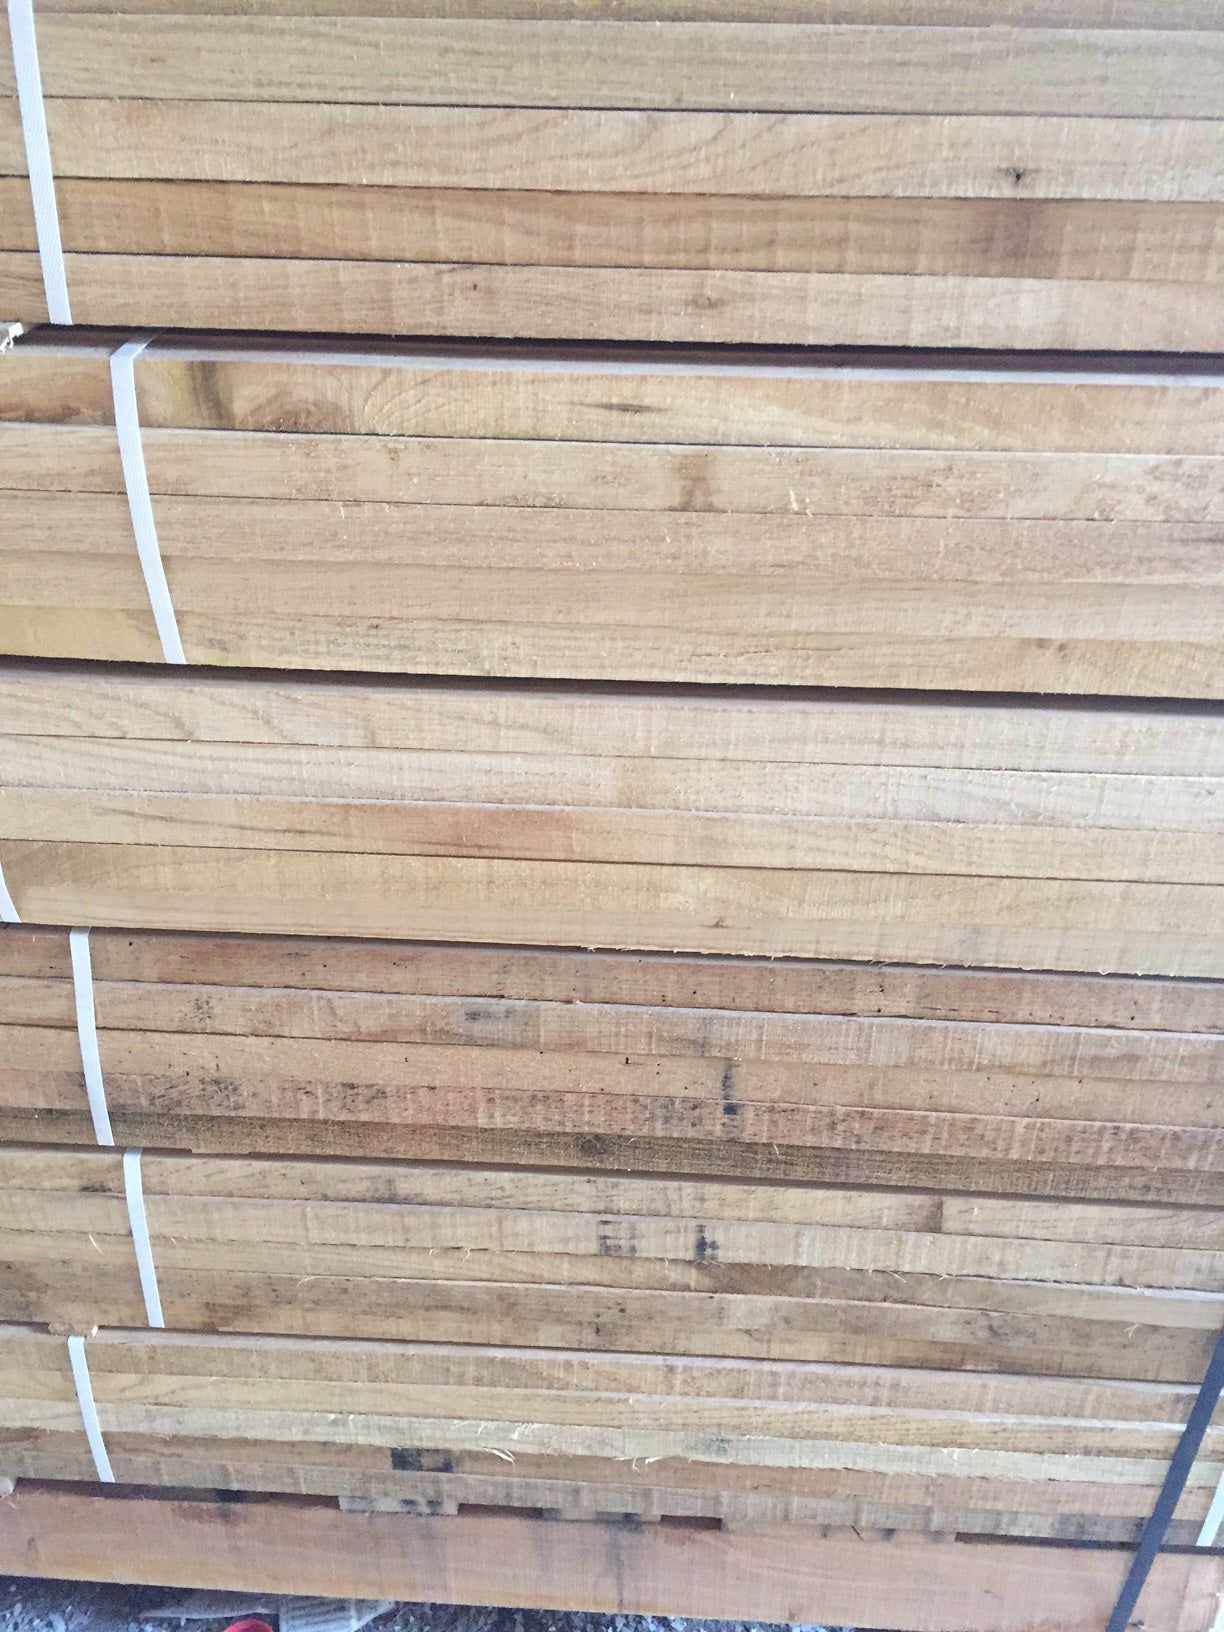 Bundles of 1"x1" White Oak Tree Support Stakes